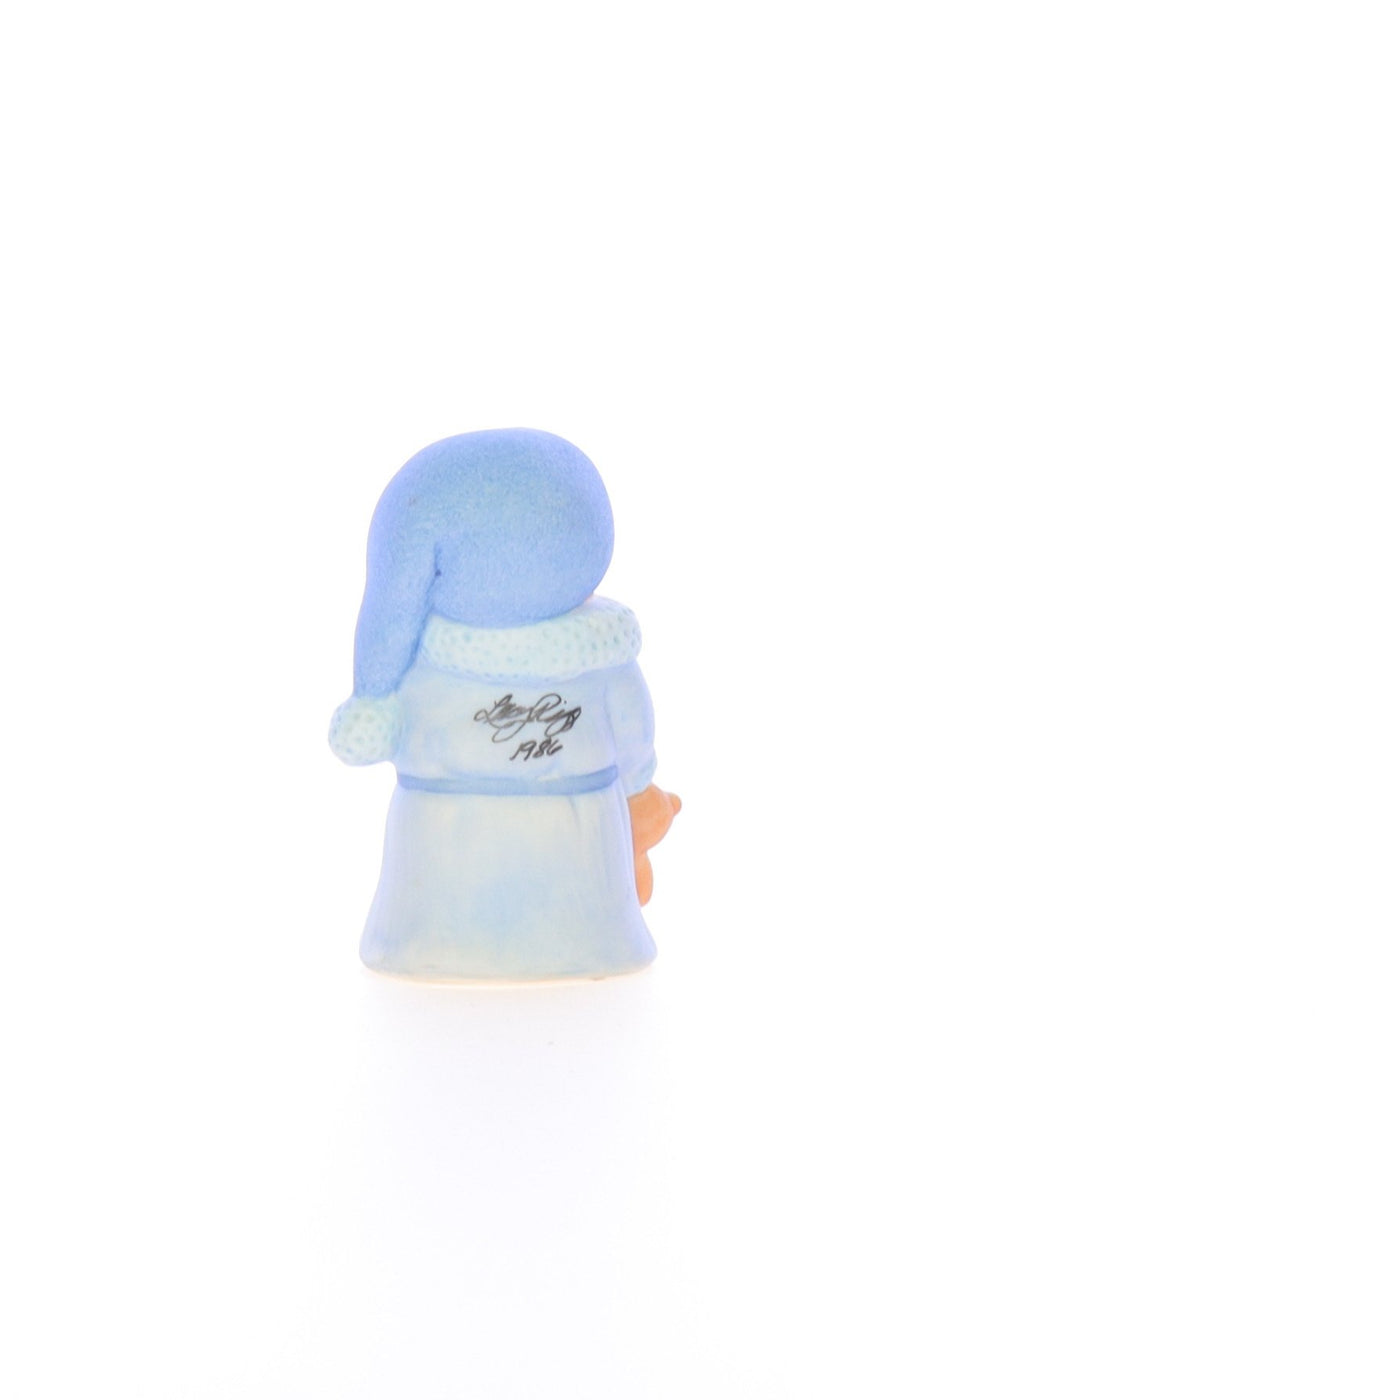 Lucy_And_Me_by_Lucy_Atwell_Porcelain_Figurine_Sleepy_Bear_in_Pajamas_Lucy_Unknown_046_05